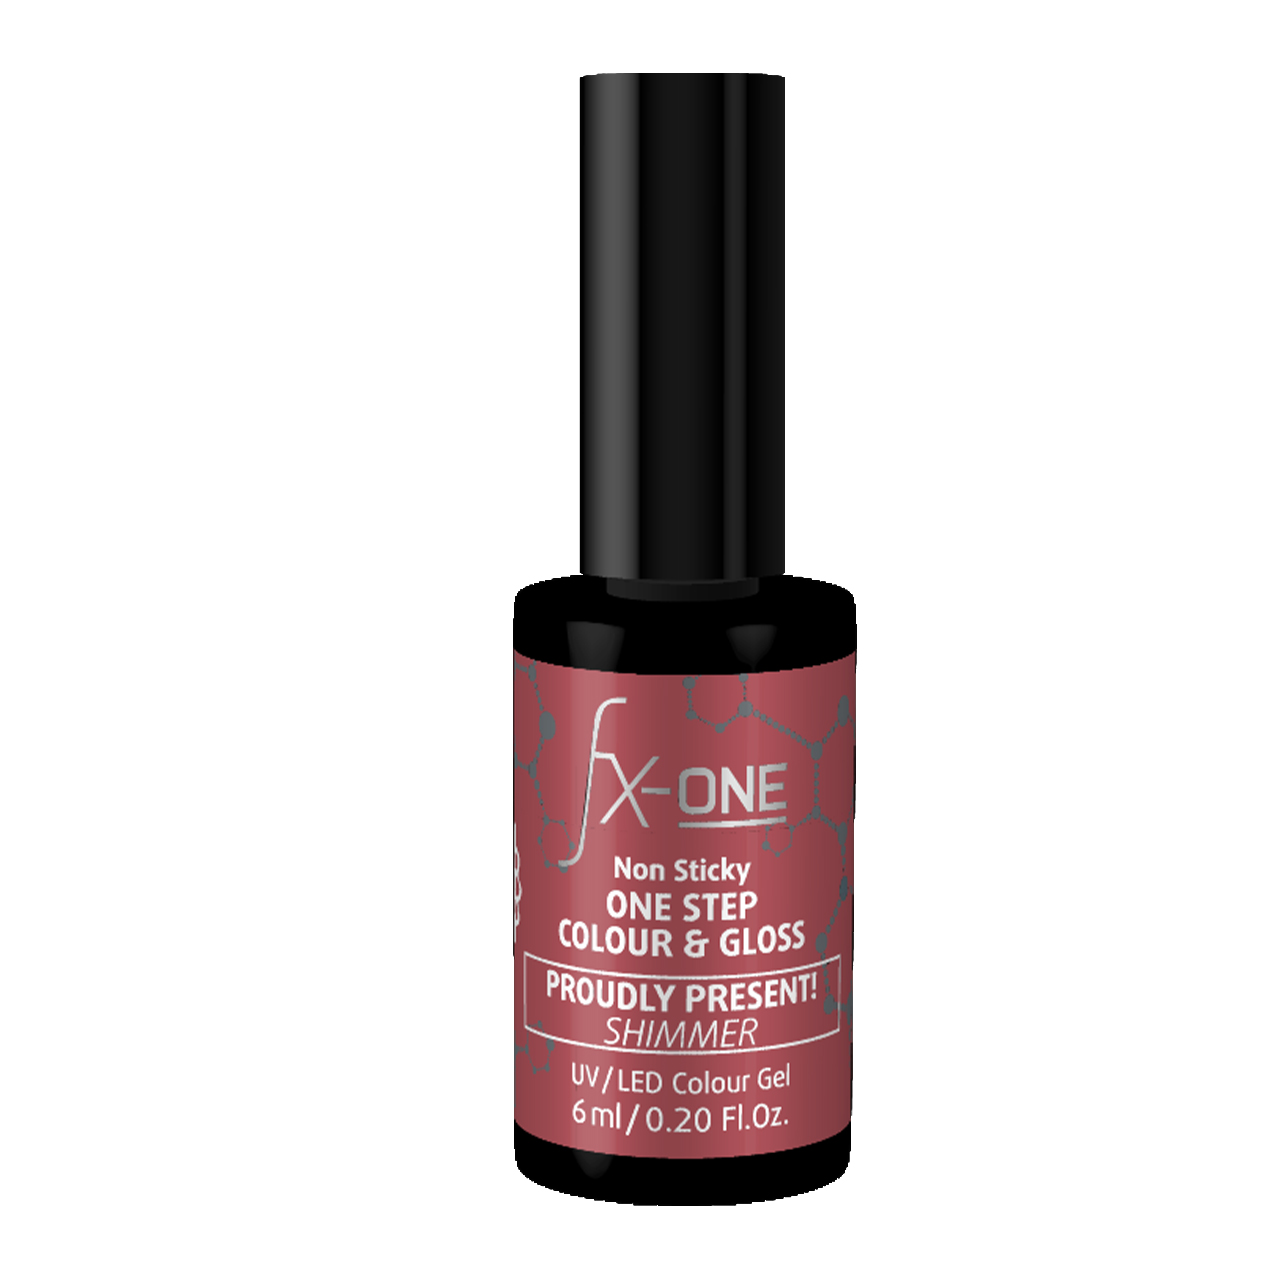 FX-One Colour & Gloss Proudly Present 6ml